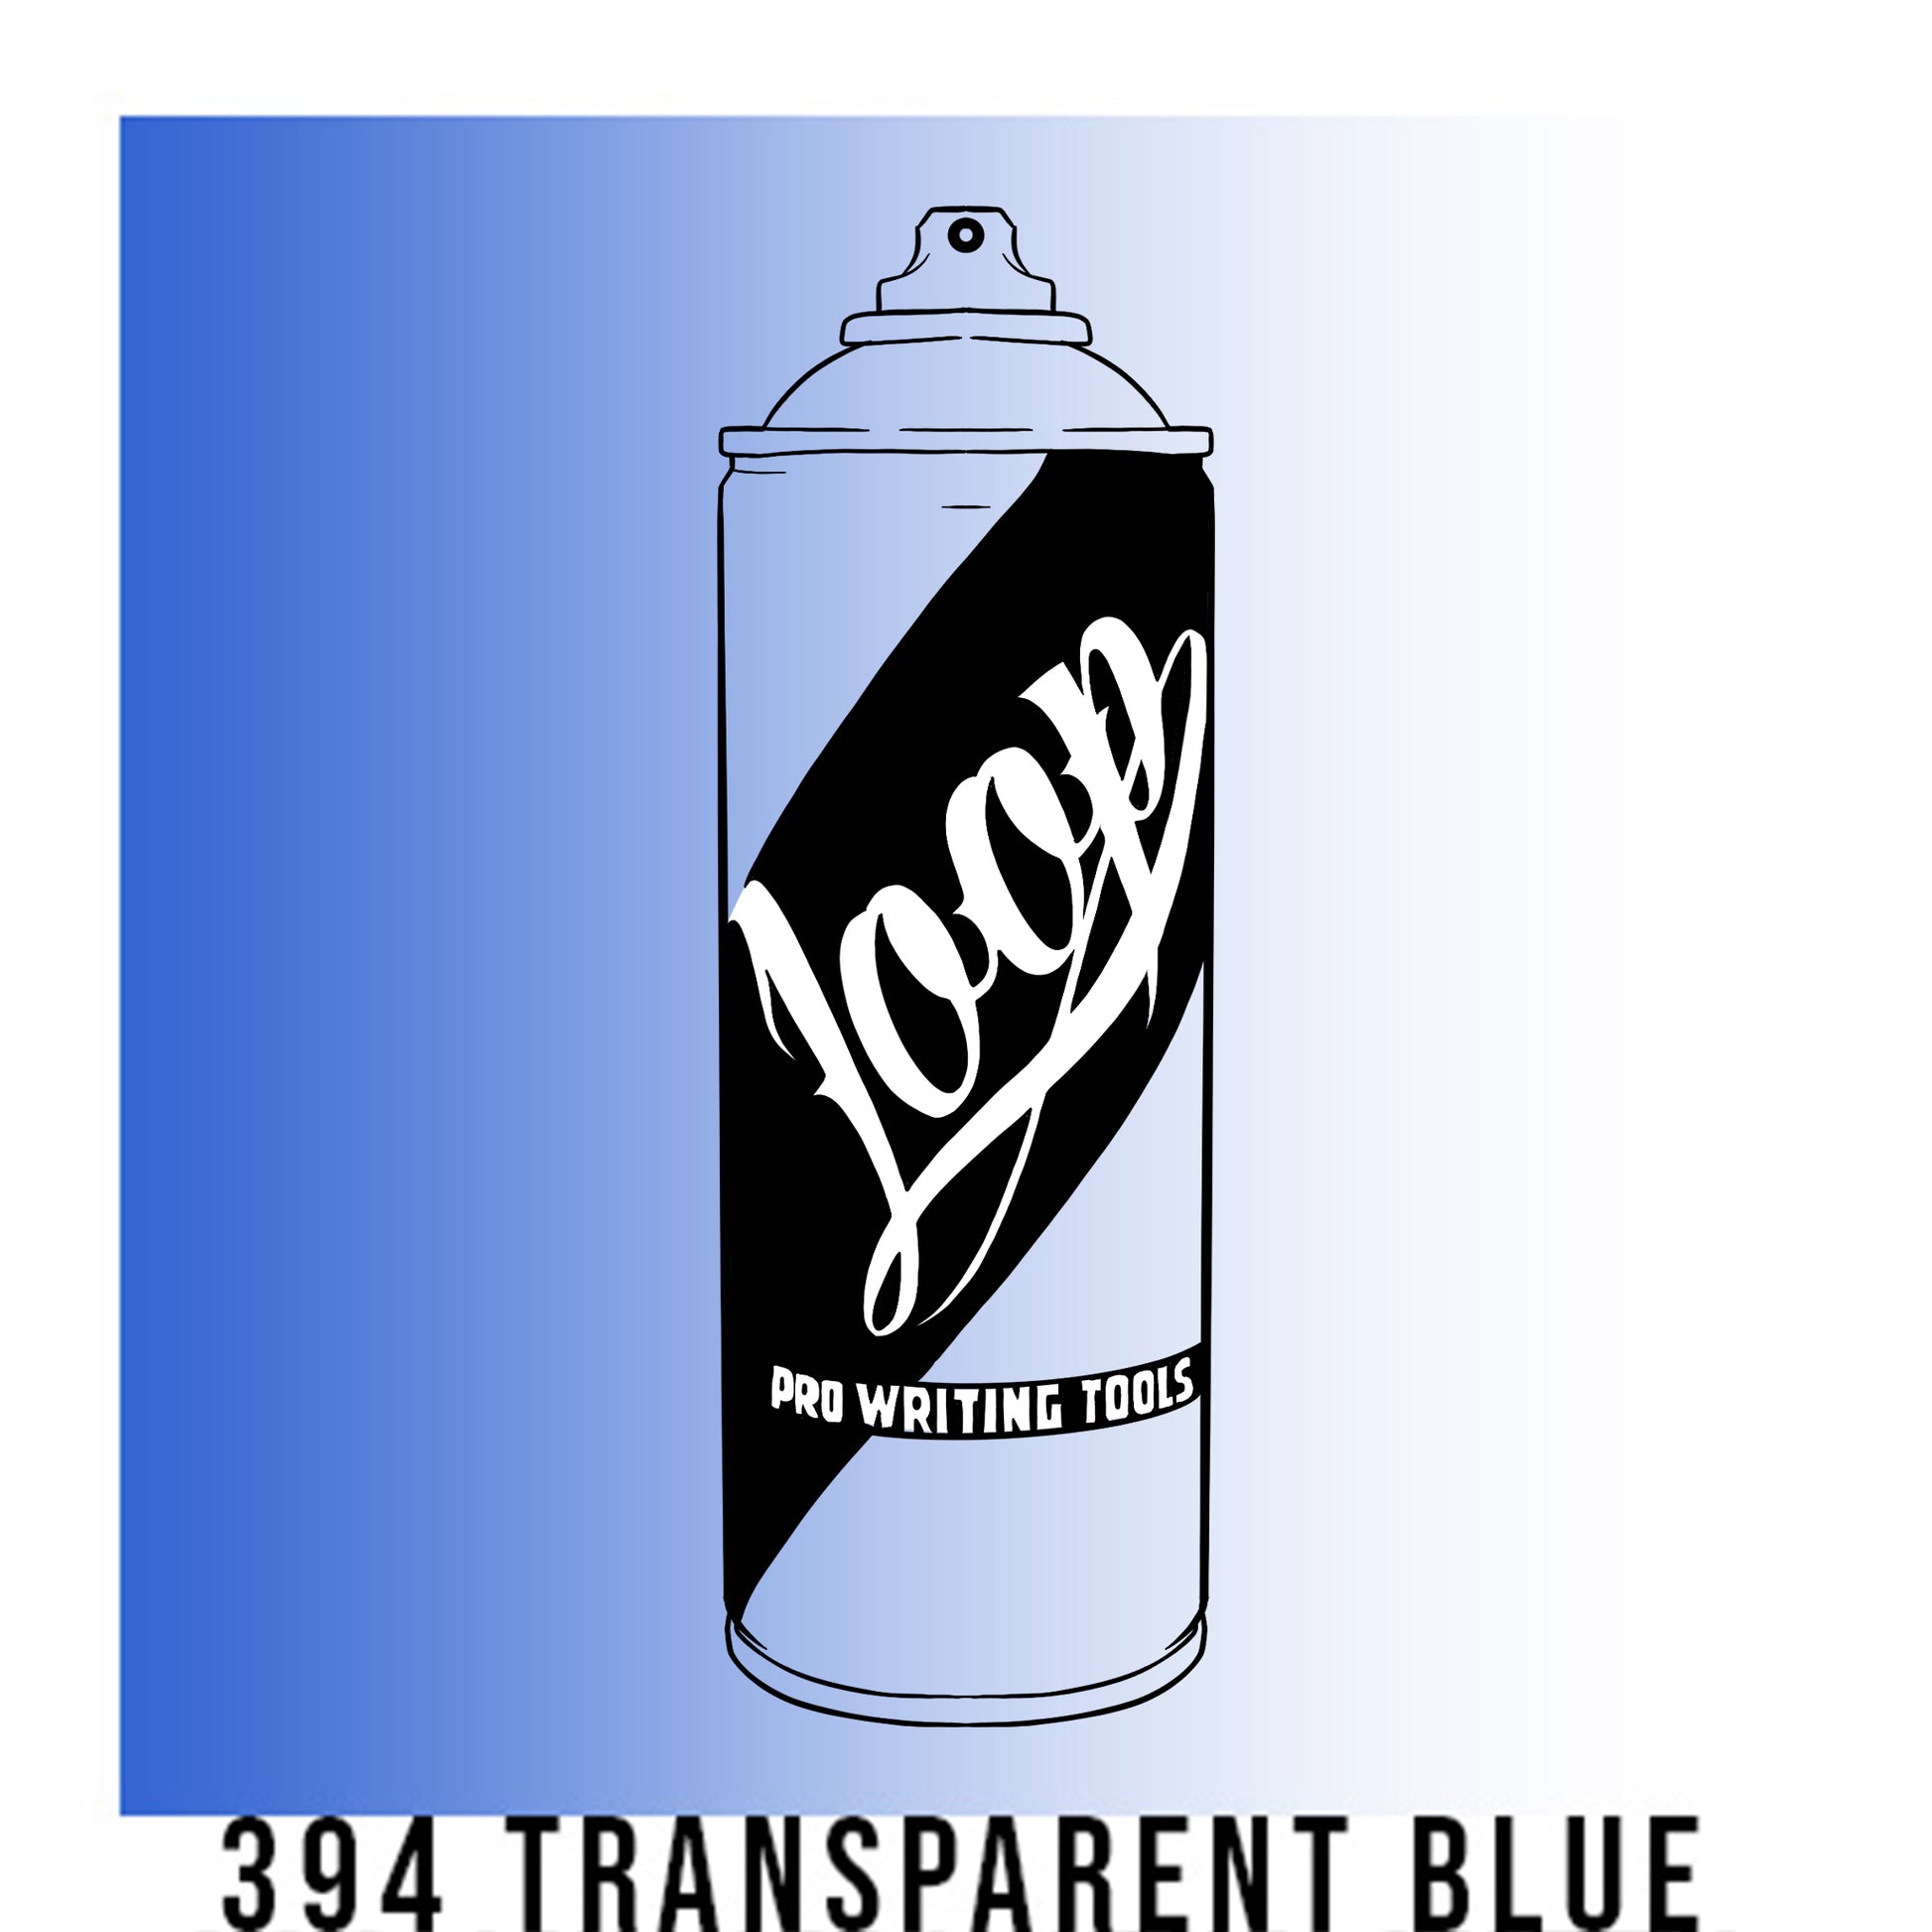 A black outline drawing of a Blue to white gradient spray paint can with the word "Loop" written on the face in script. The background is a color swatch of the same Blue to white gradient with a white border with the words "394 Transparent blue" at the bottom.